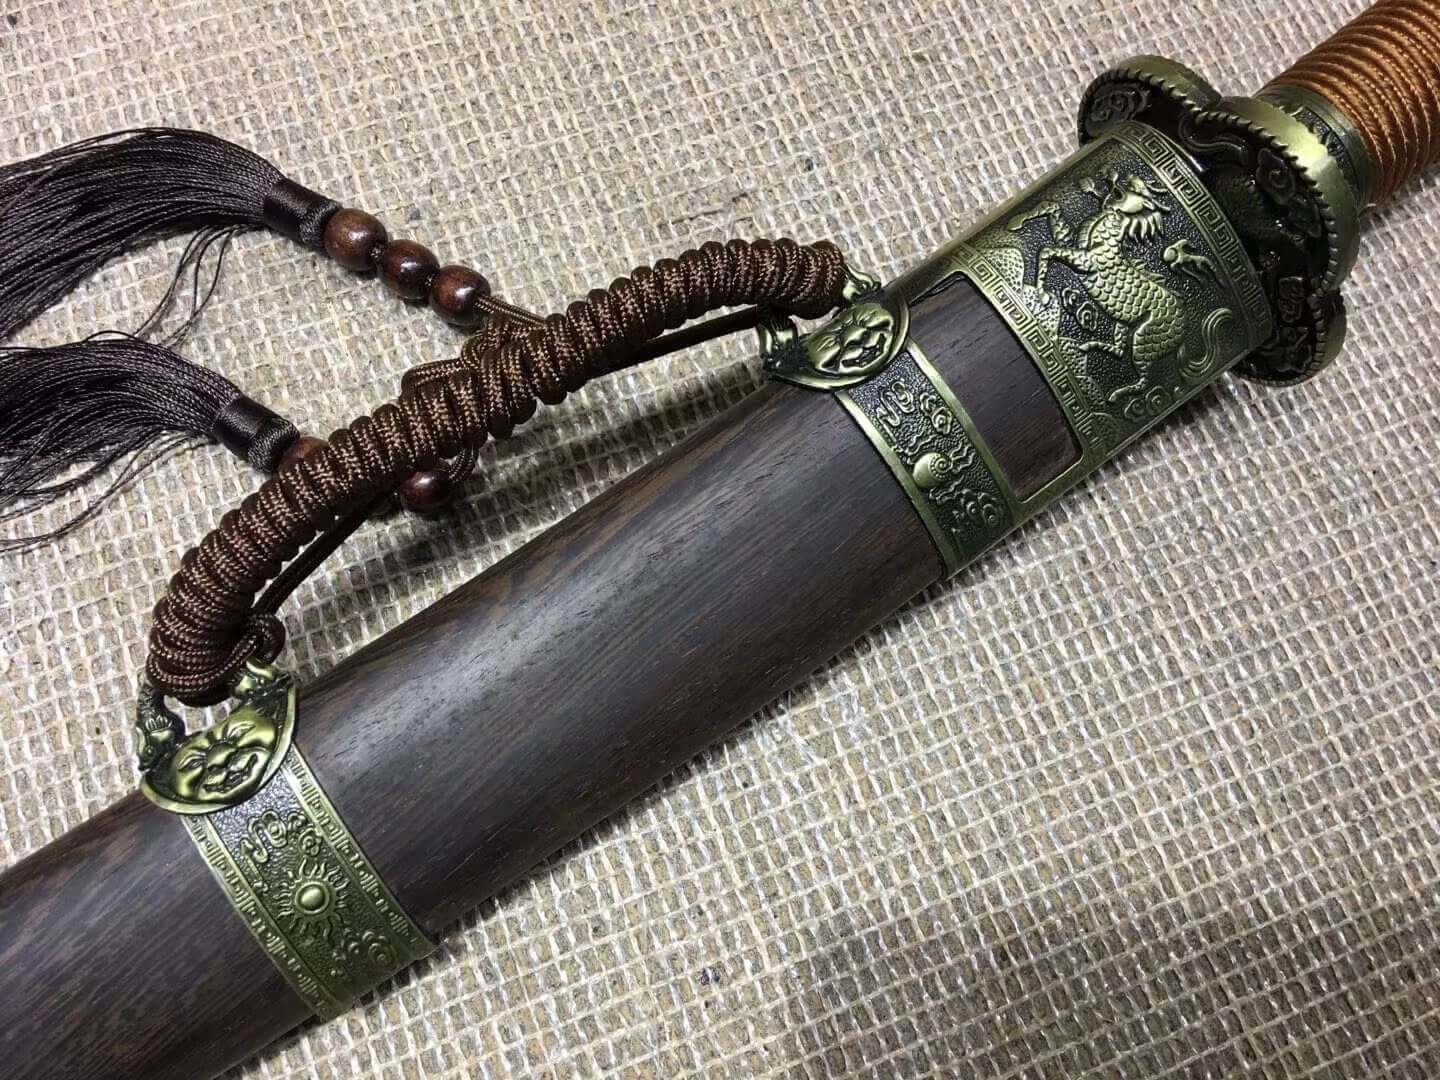 Broadsword/Kangxi dao/Damascus steel red blade/Alloy fittings/Rosewood scabbard - Chinese sword shop